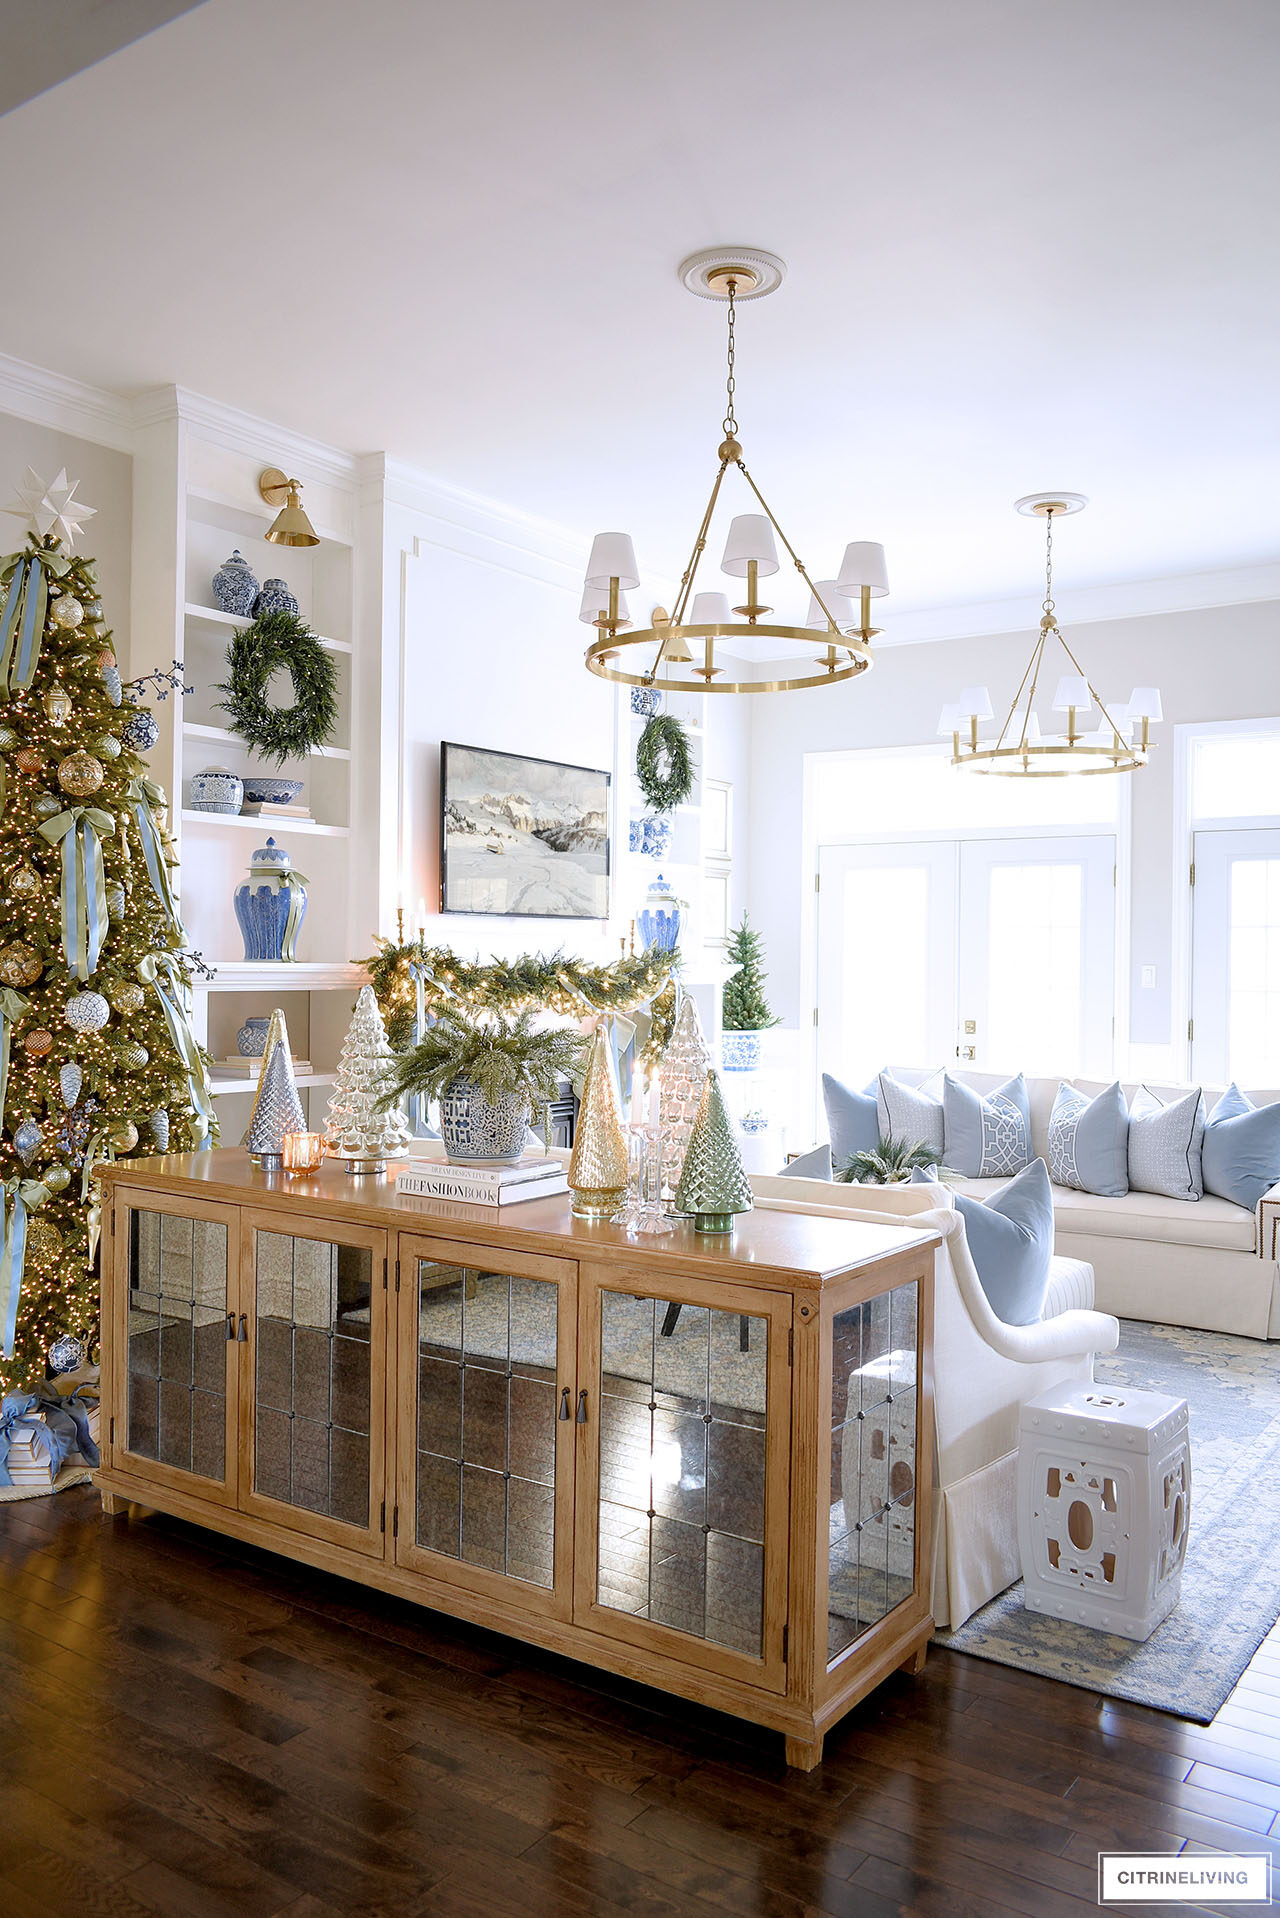 Living room decorated for Christmas with greenery, blue and white chinoiserie.